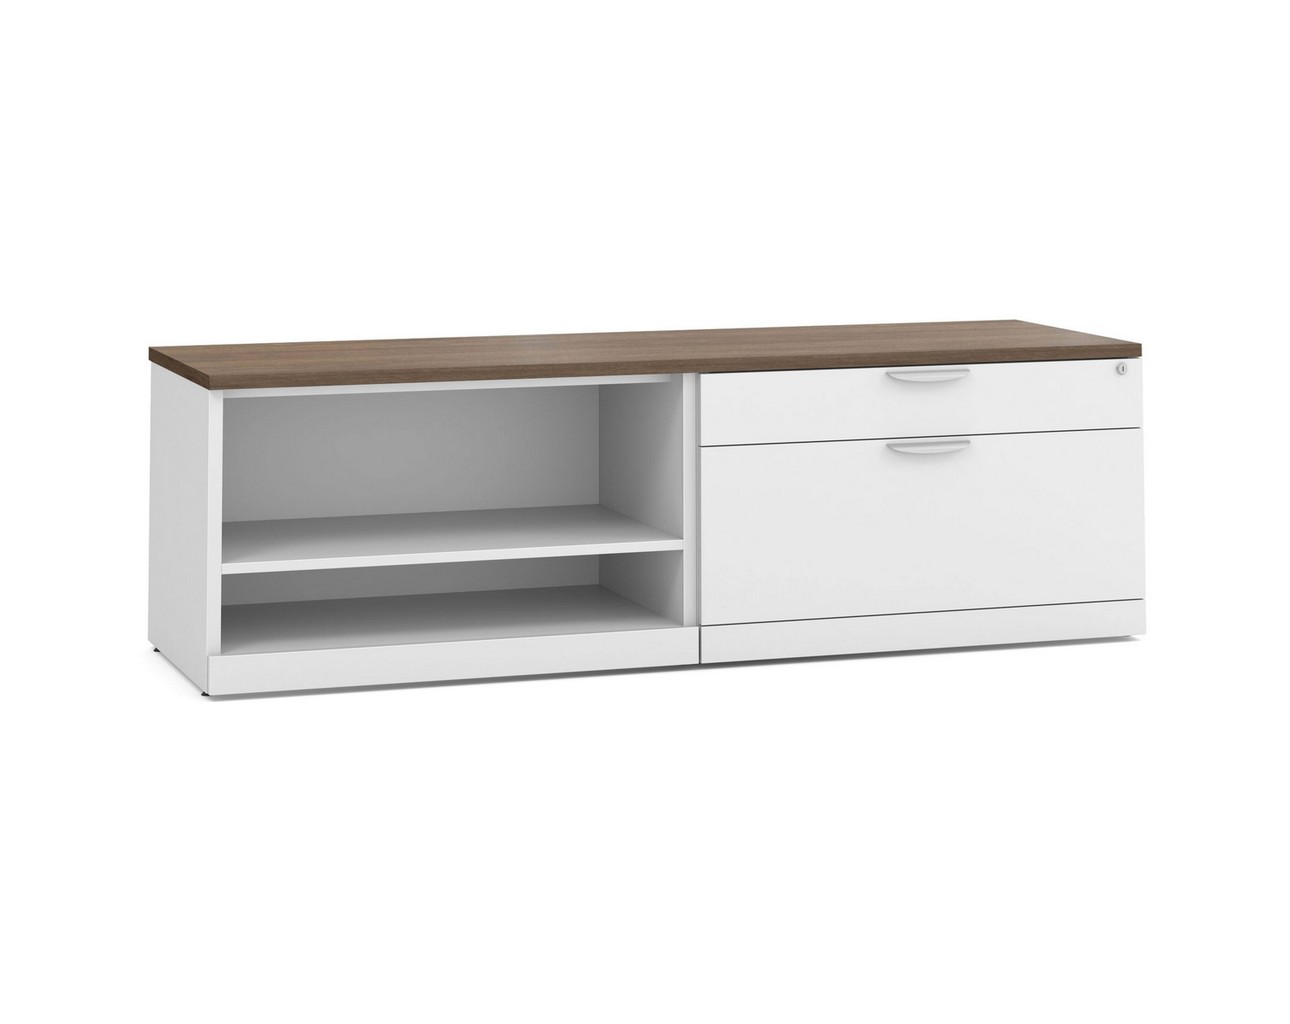 Elements Storage Cabinet and Bookshelf Credenza – WHT Base and MW Top